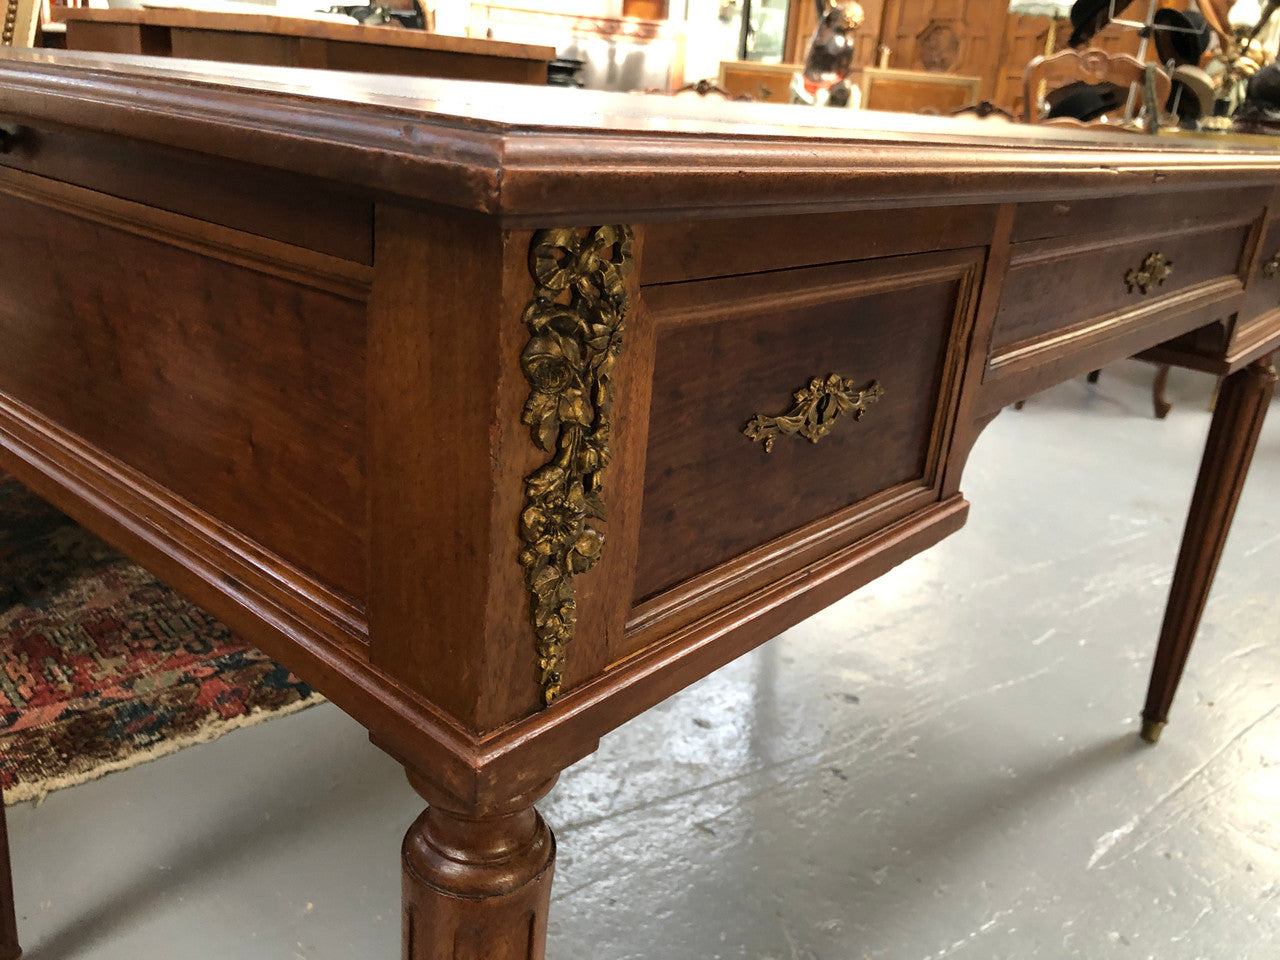 Lovely French Mahogany Louis XVI style leather top desk. With beautiful ormolu details and three drawers. There are also two slides on either side with tooled leather tops and in good original detailed condition.